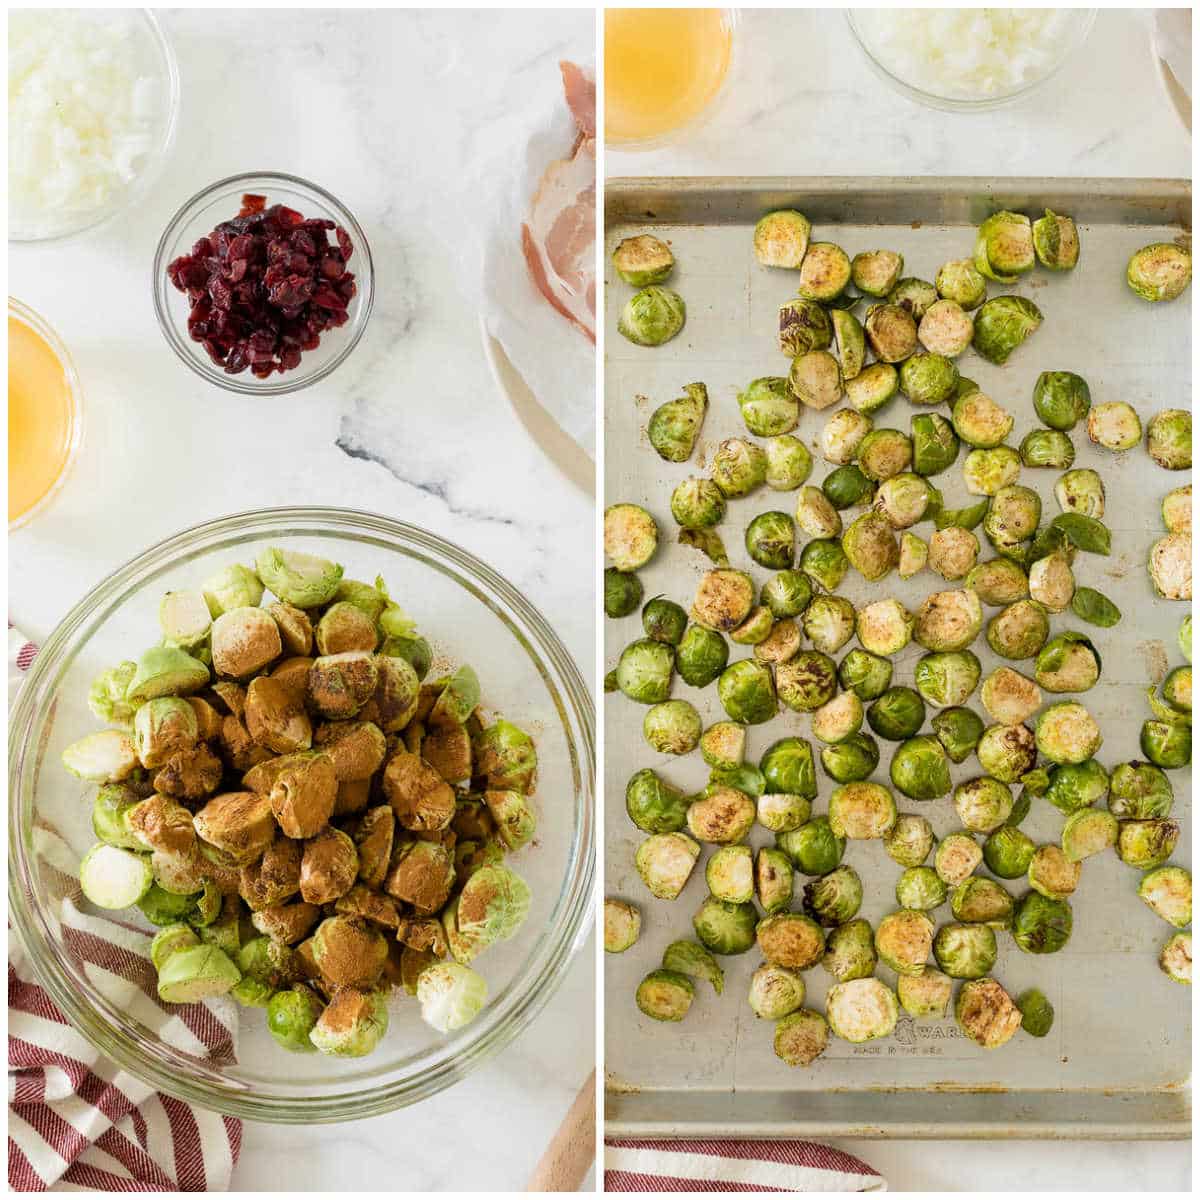 Steps to make roasted brussel sprouts with cranberries and bacon.